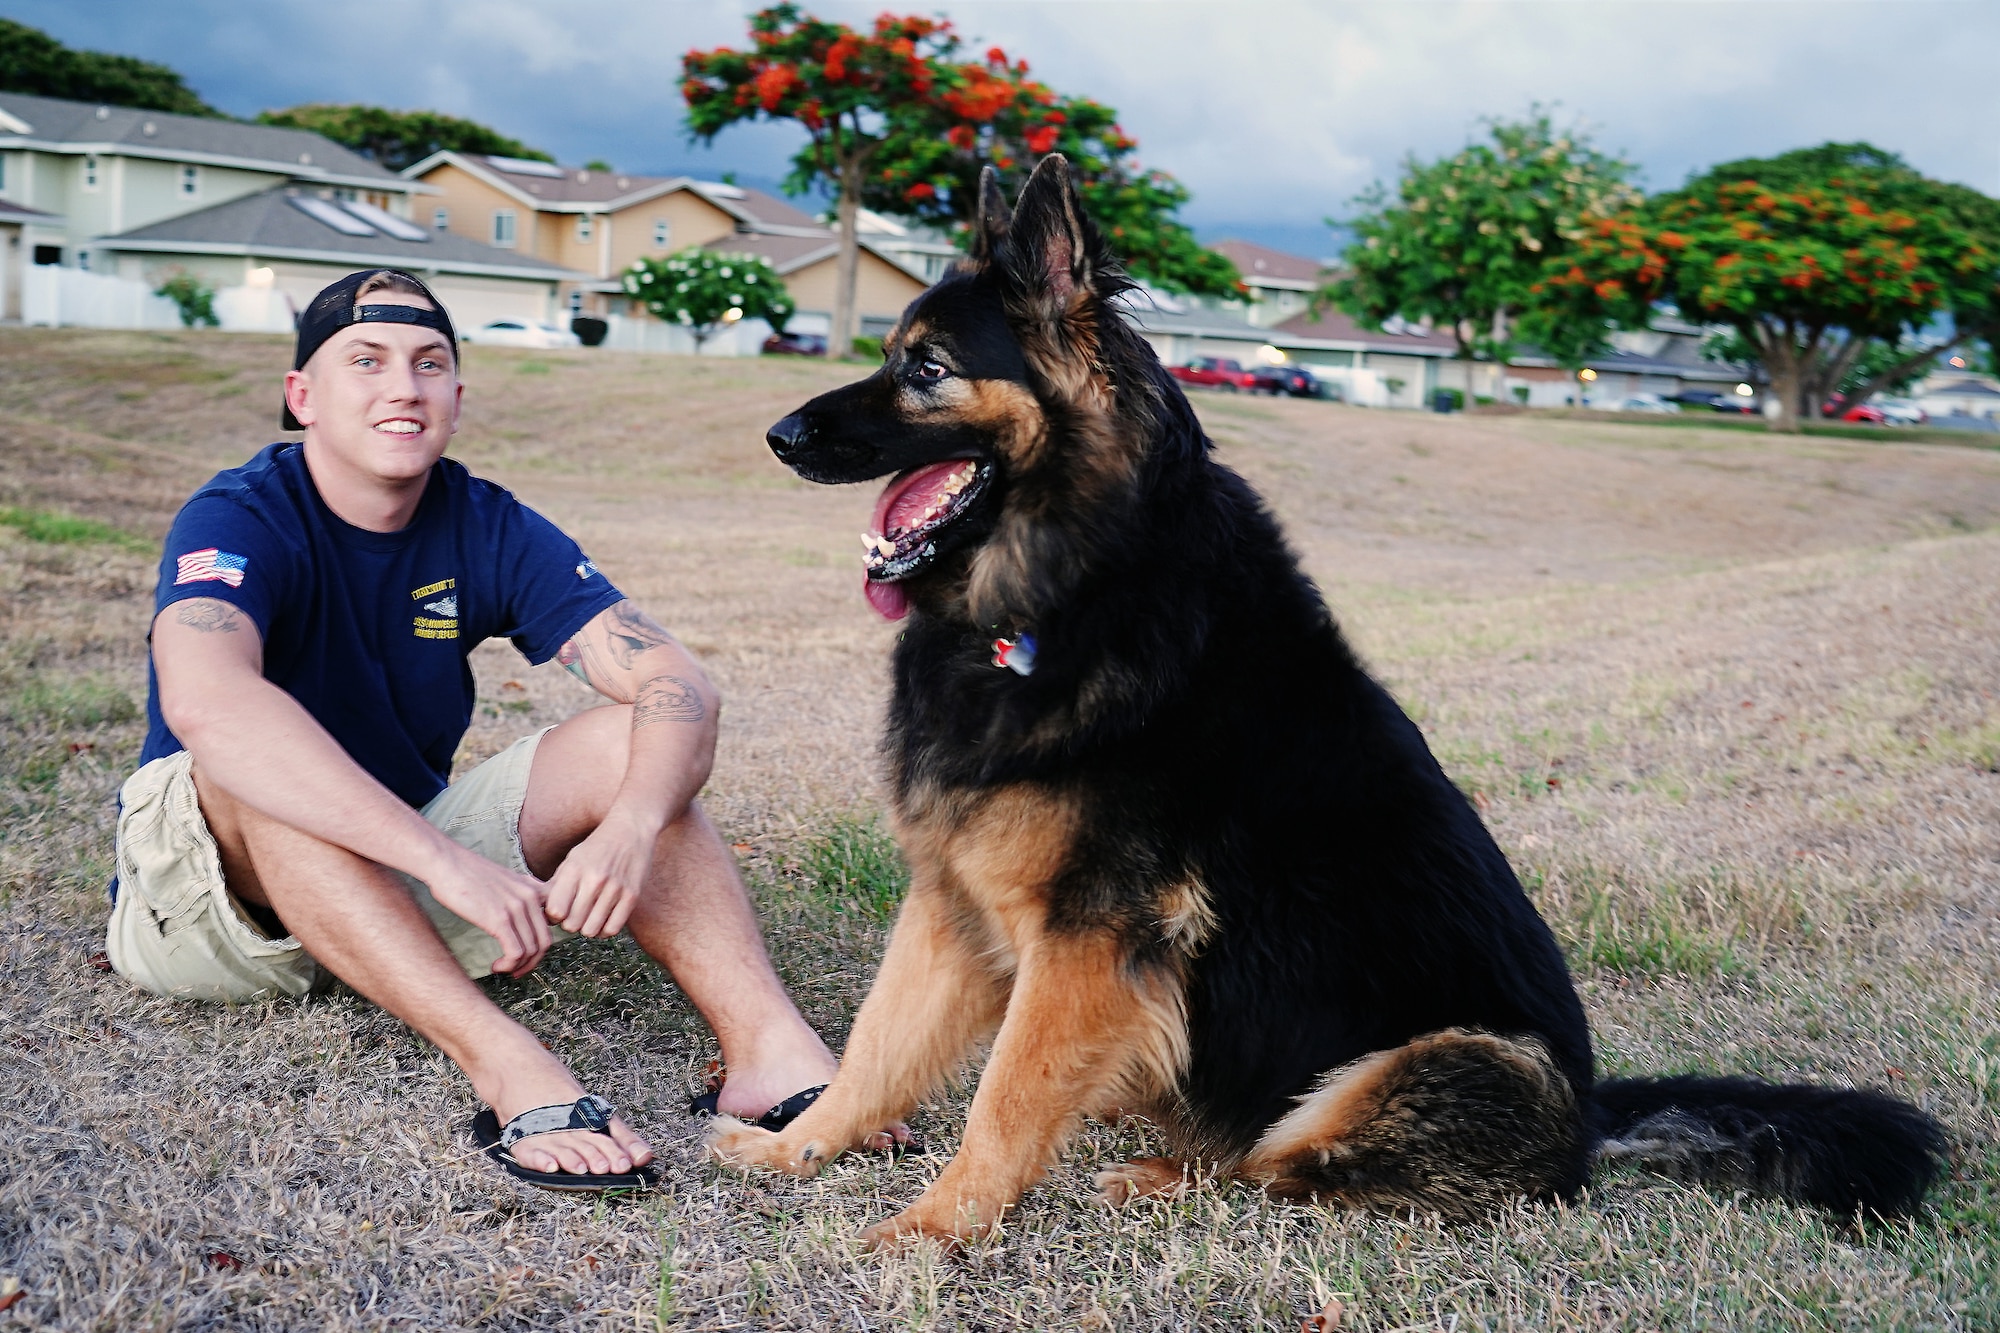 U.S. Navy Sonar Technicians Submarine 1st Class Christopher Carr, Naval Submarine Training Command Pacific instructor, relaxes after playtime with his dog, Zeus, in Honolulu, Hawaii, Aug. 12, 2020. Zeus is a 110-pound Shiloh Shepherd who was trained by a police force K9 trainer. (U.S. Air Force photo by Airman 1st Class Erin Baxter)